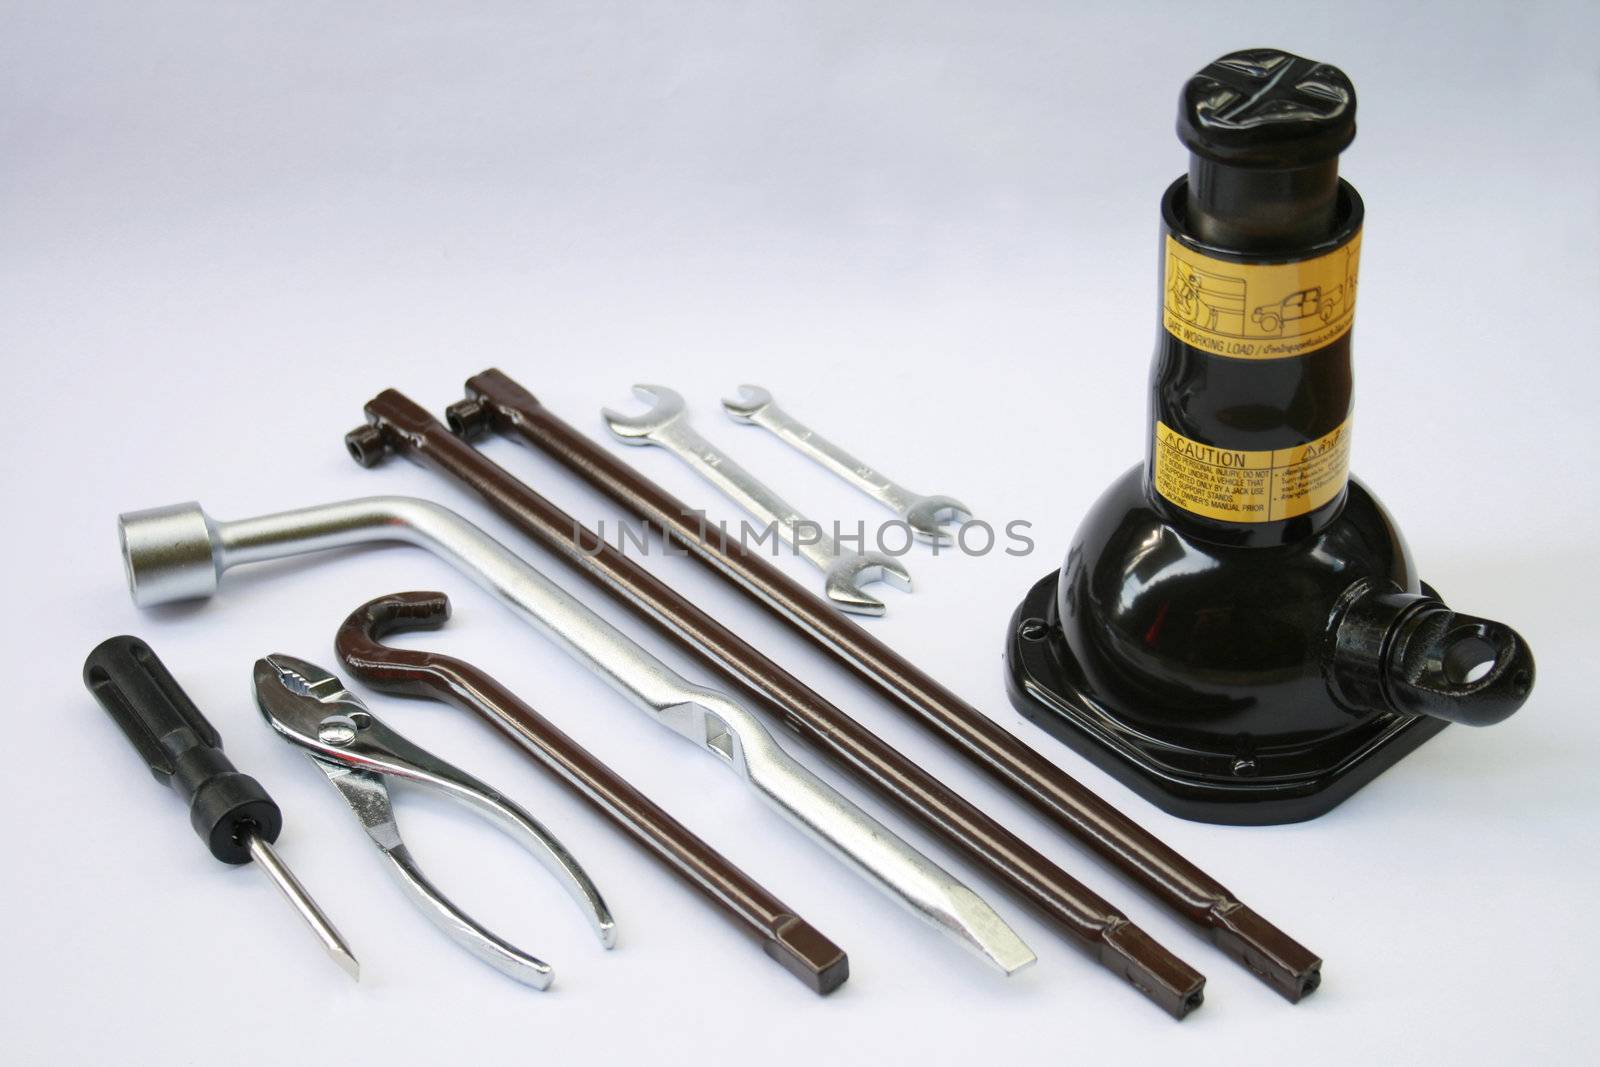 car tool set for changing flat tires
